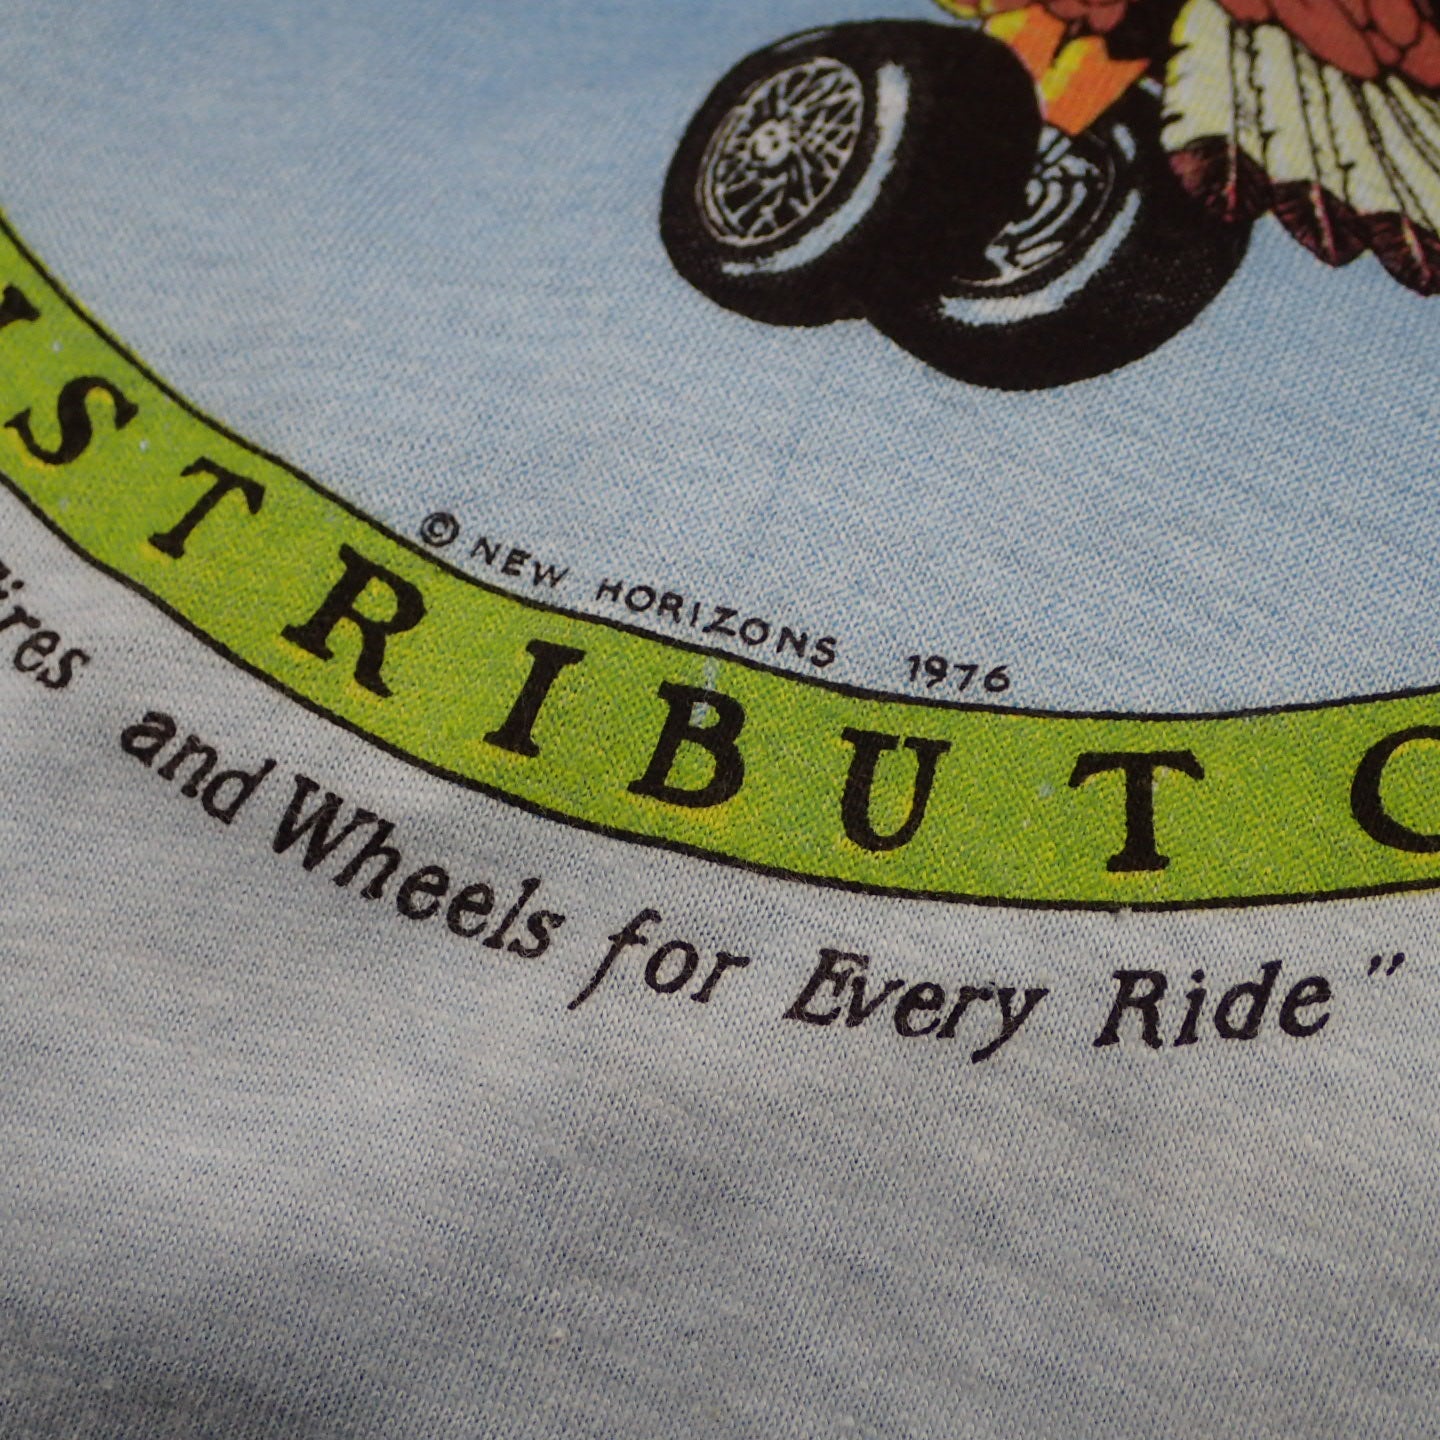 70s MONSTER CORPORATION T-shirt "Eagle and Wheels tee"